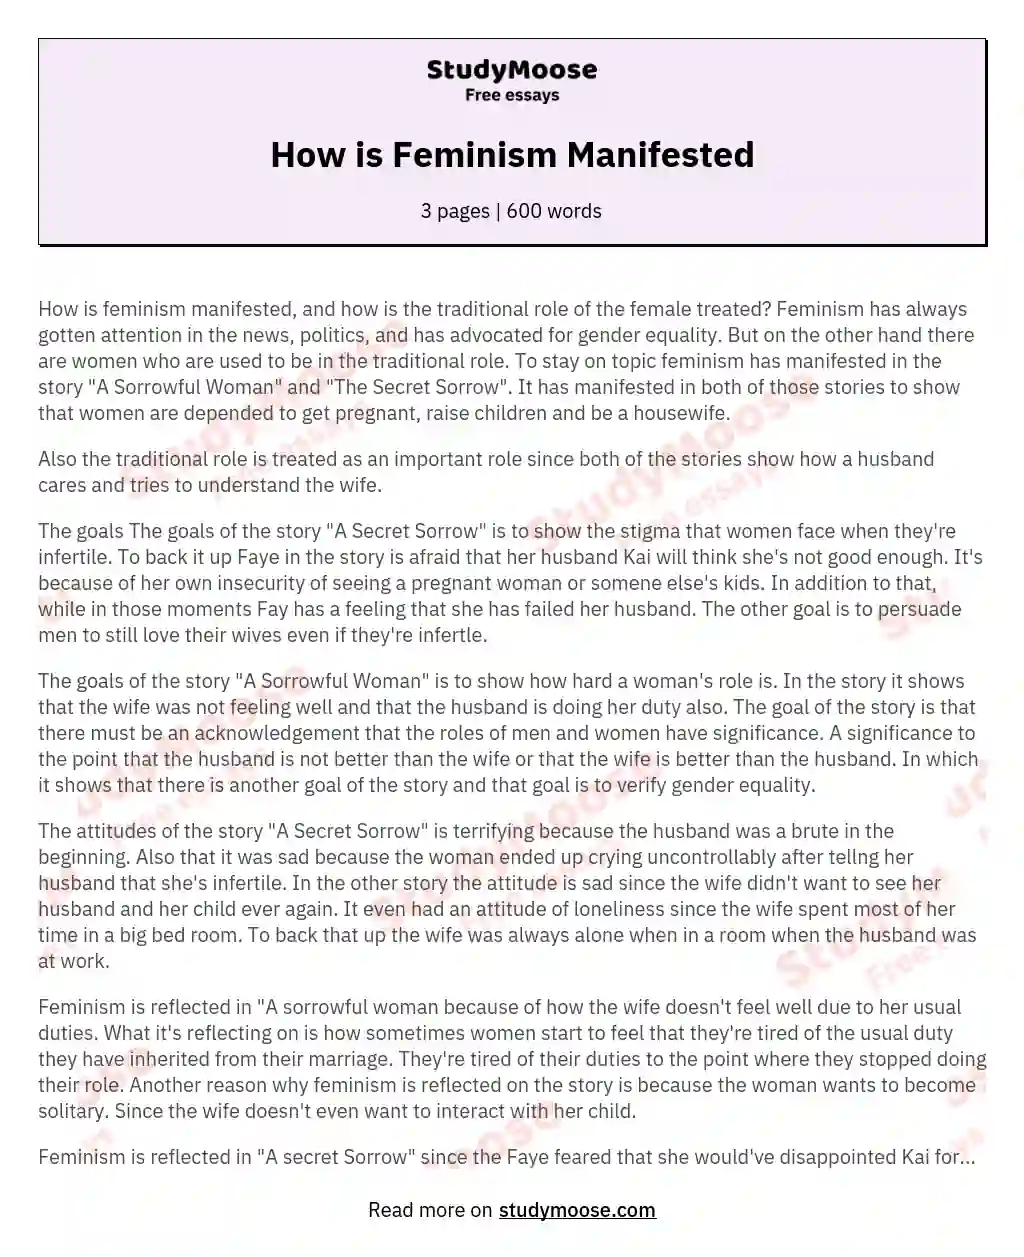 How is Feminism Manifested essay